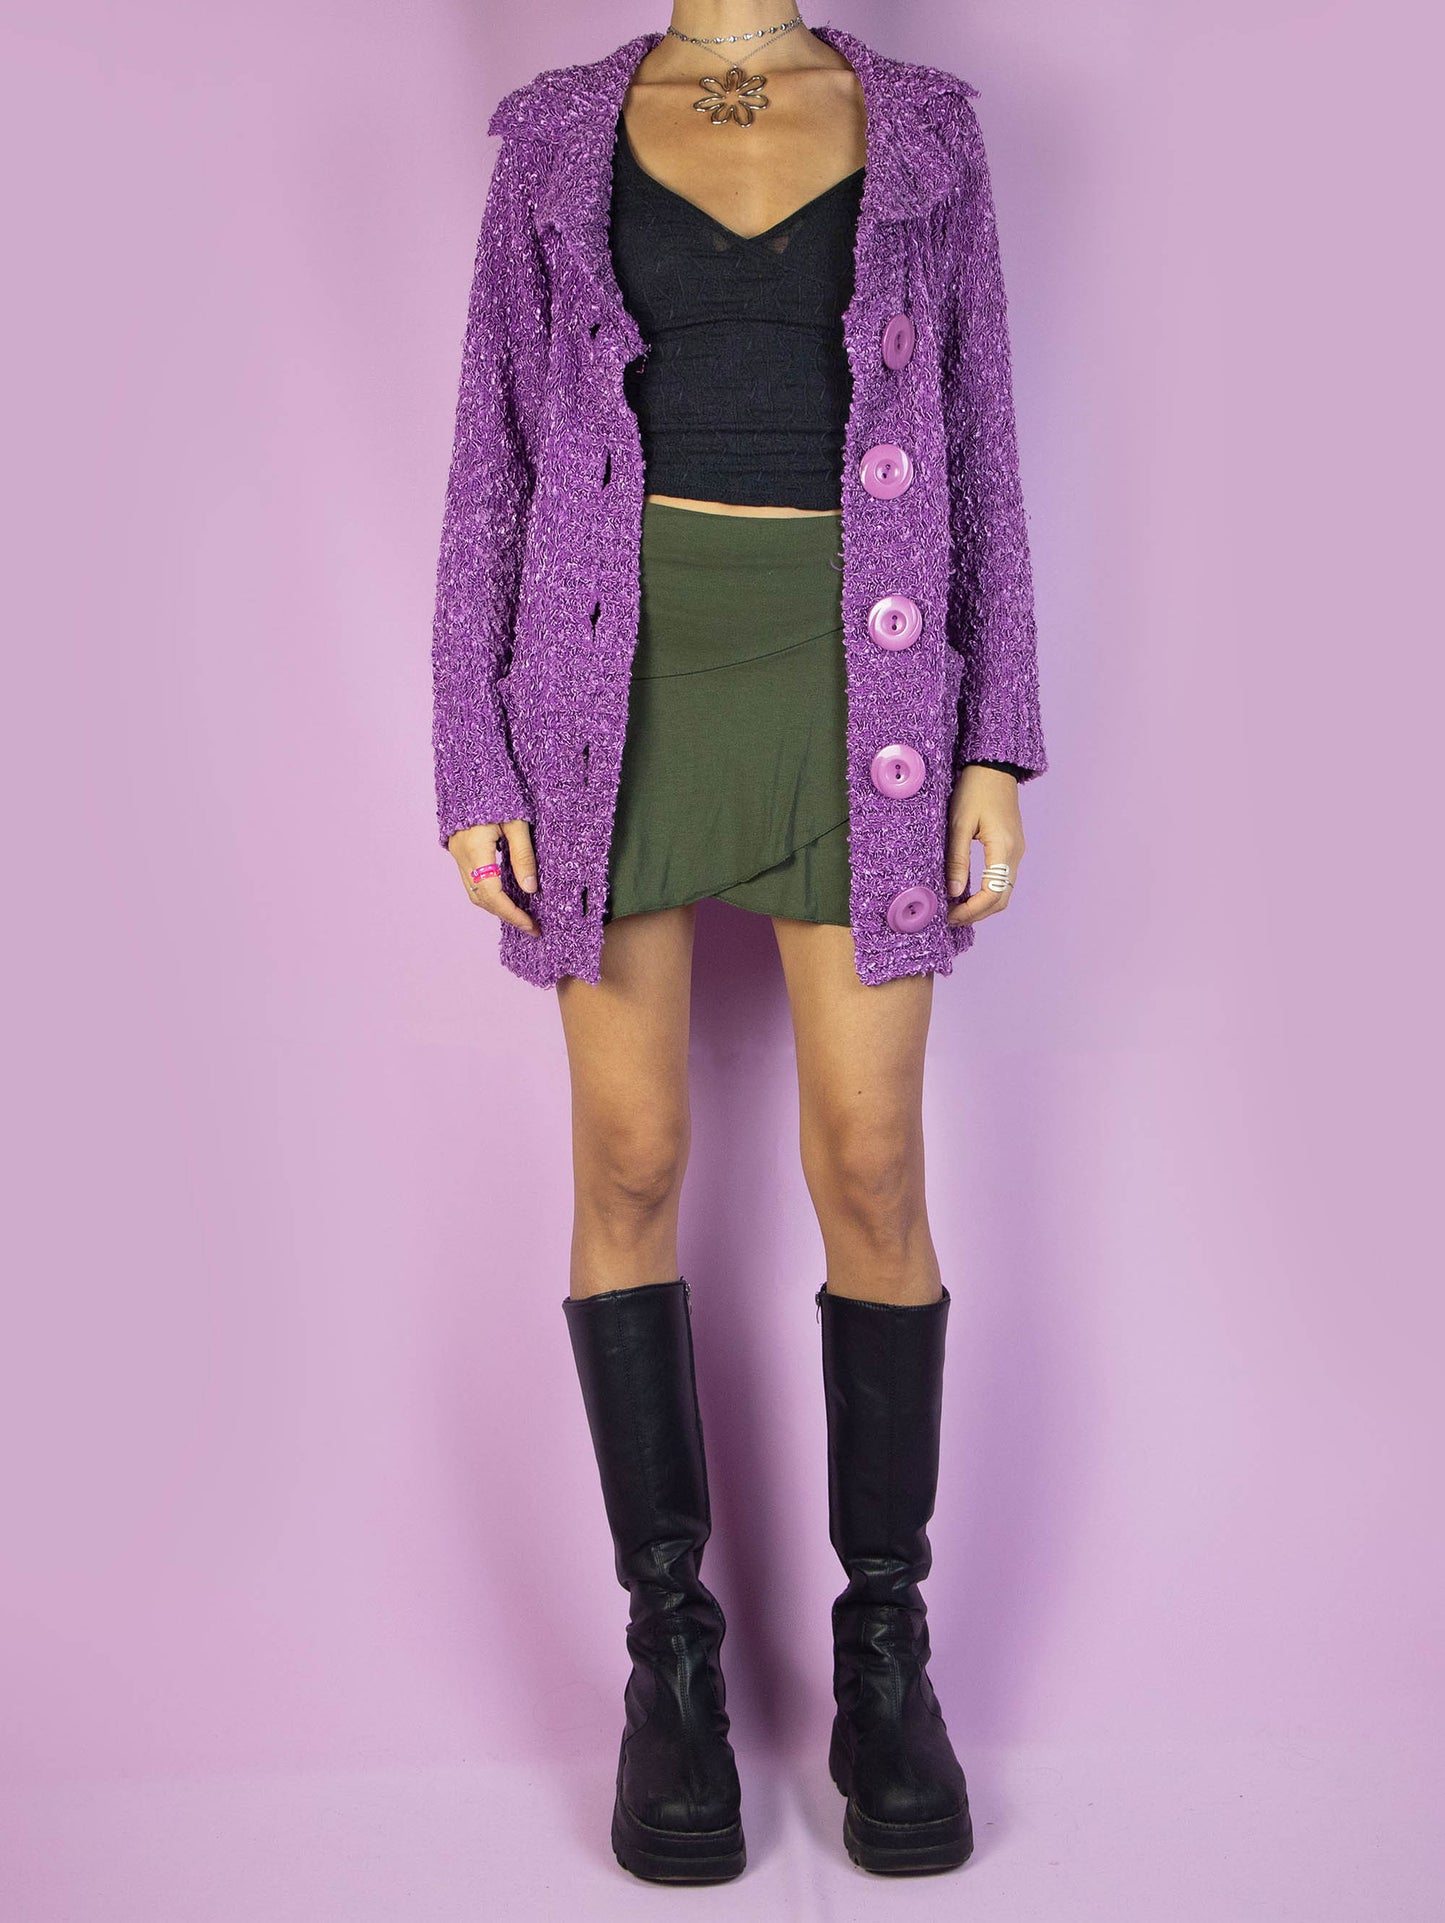 The Y2K Purple Knit Cardigan is a vintage 2000s winter chunky knit cardigan sweater with a collar, pockets, and big buttons.